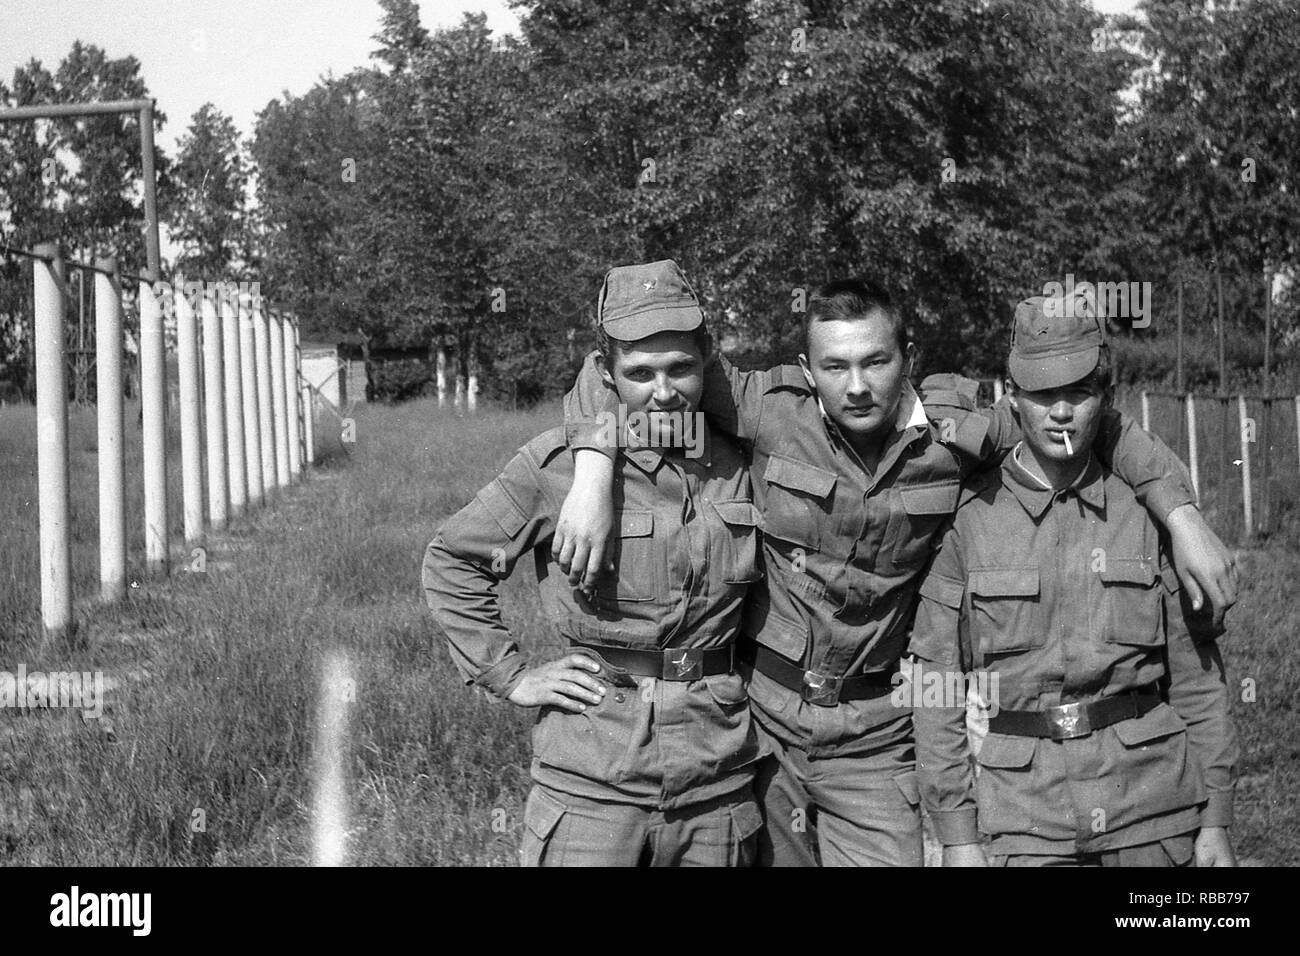 MOSCOW REGION, RUSSIA - CIRCA 1992: Soldiers of the Russian army on the sports field. Film scan. Large grain. Stock Photo